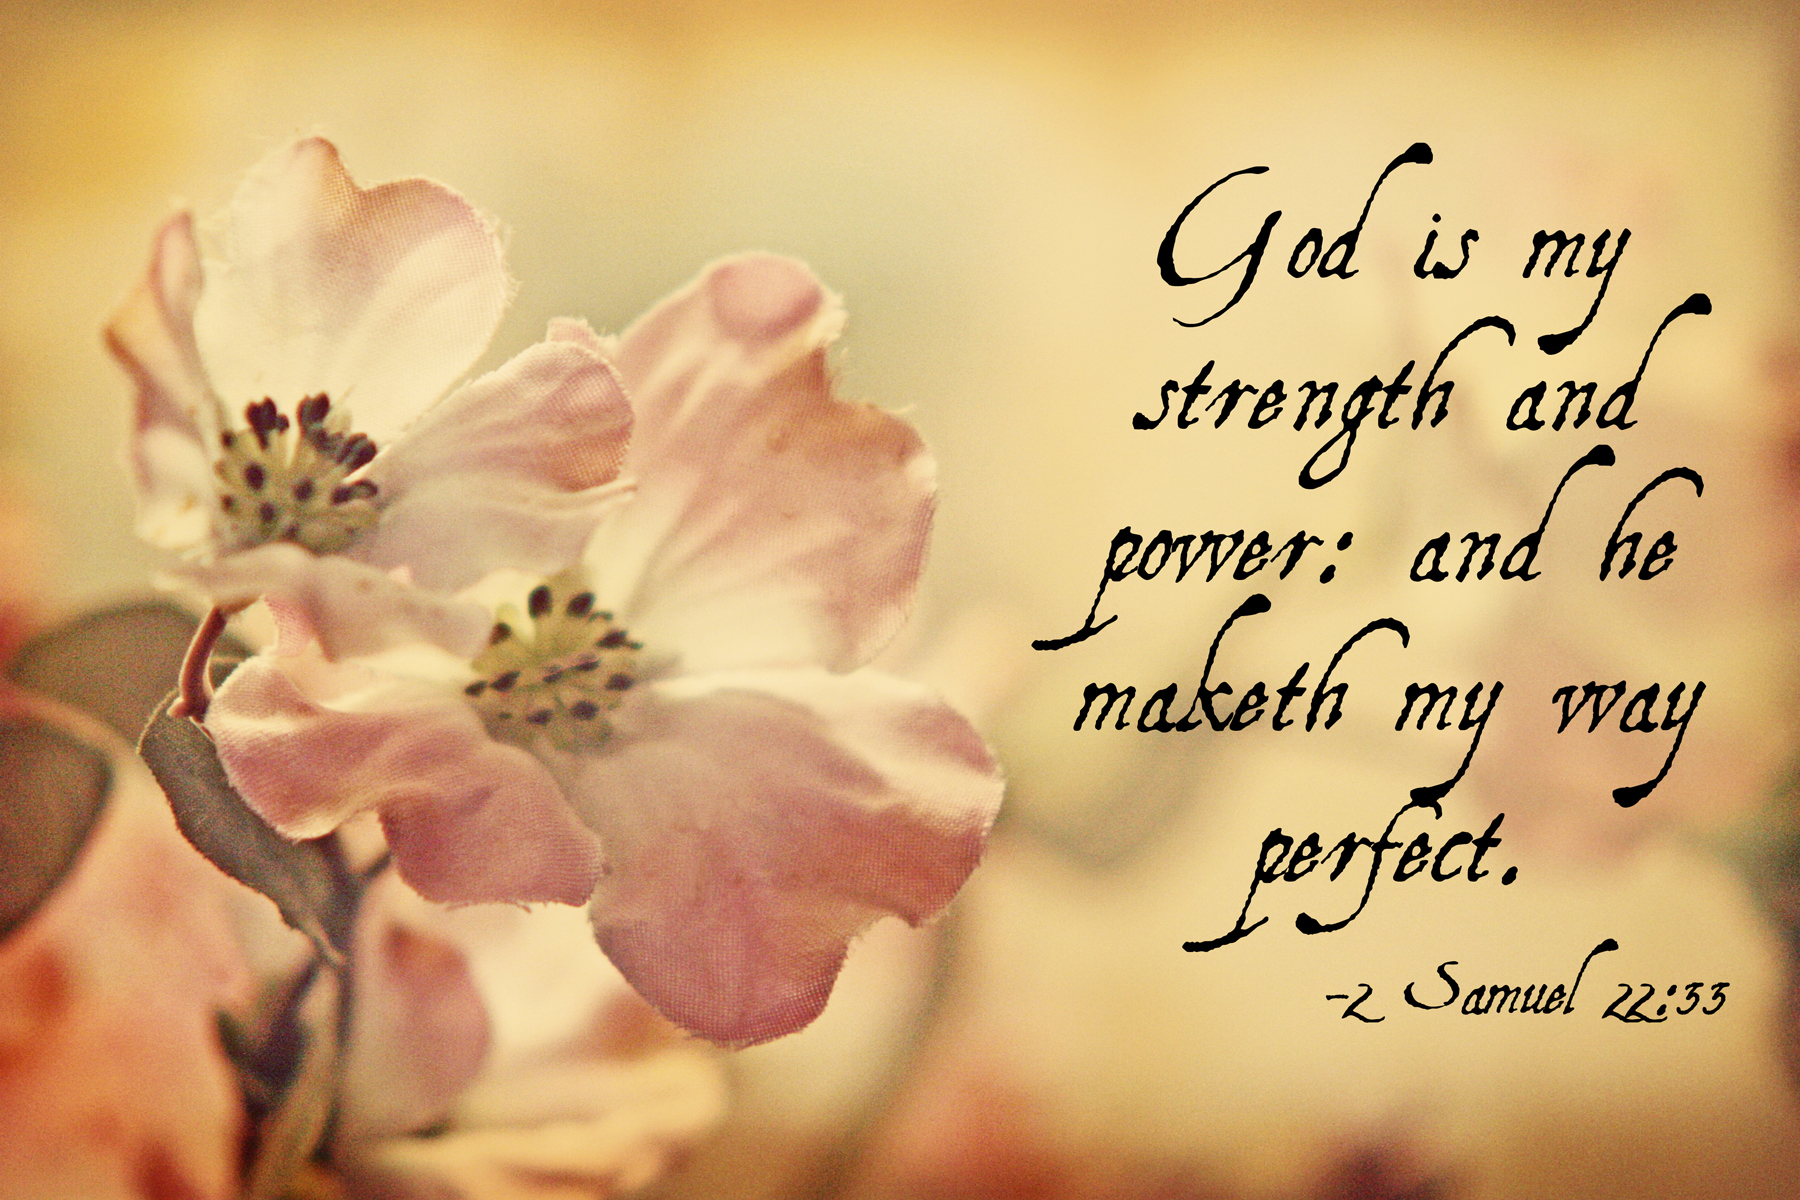 Strength Quotes About God - HD Wallpaper 